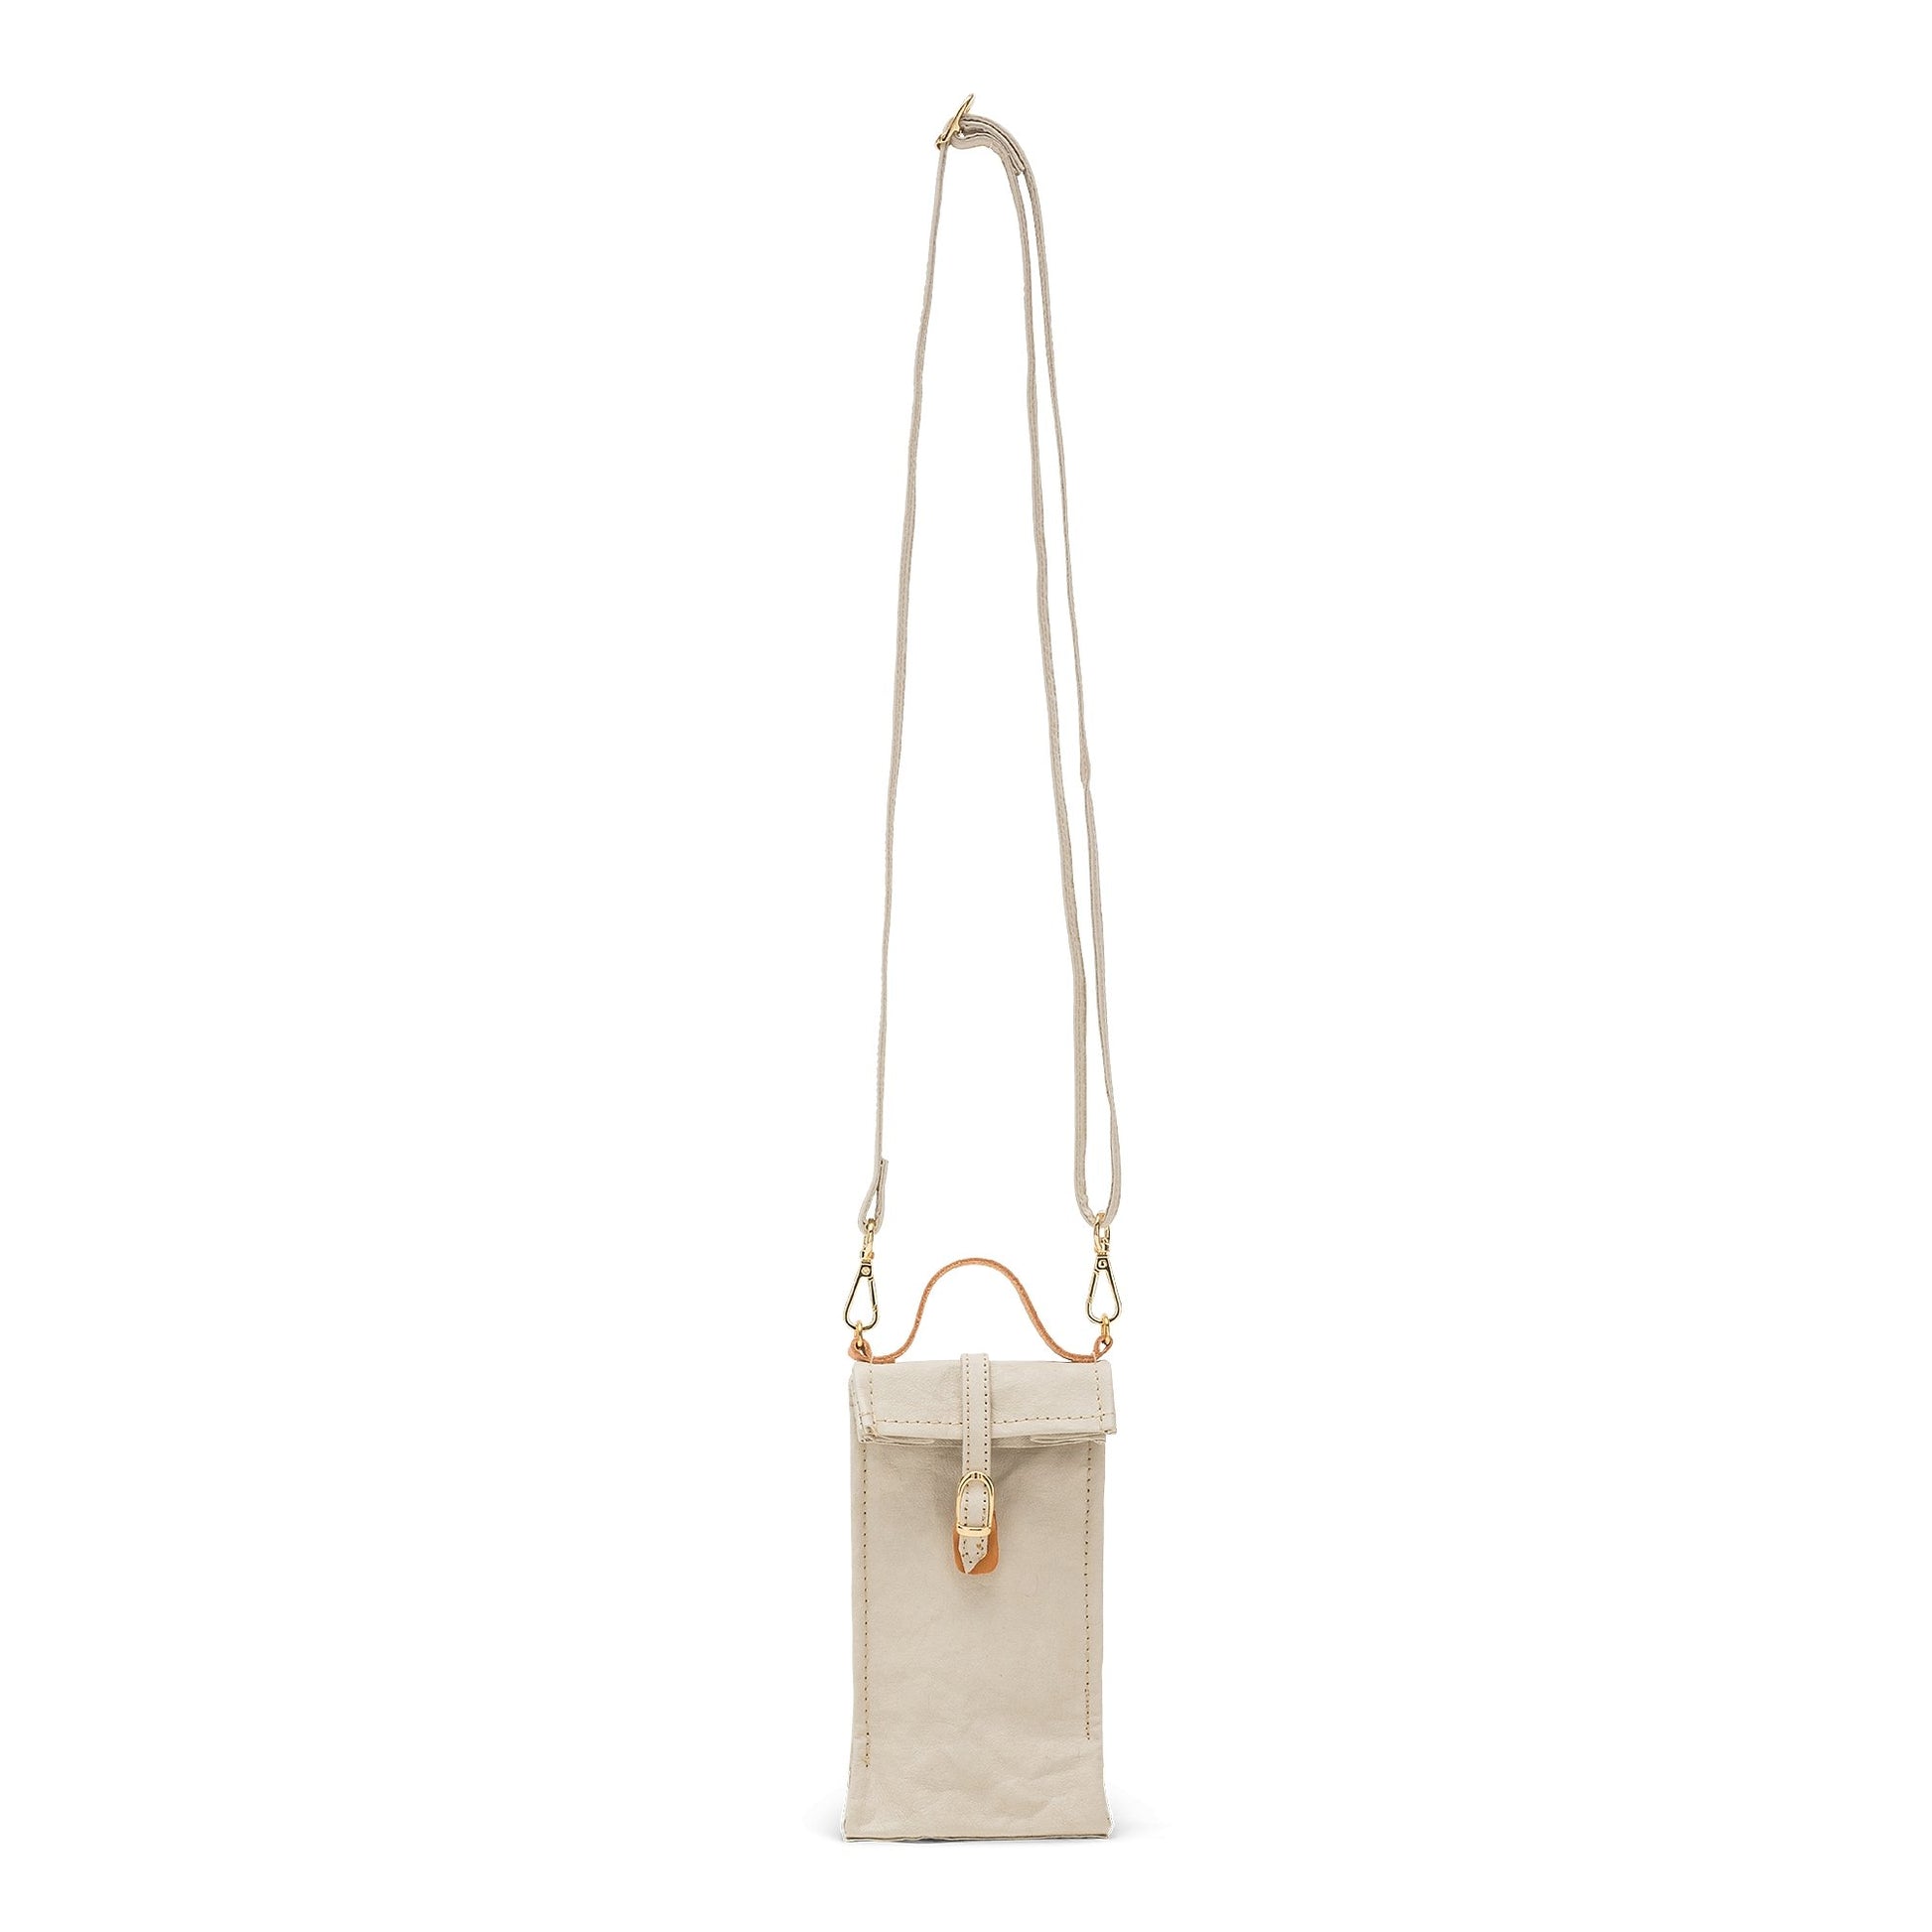 A washable paper phone pouch is shown from the front in cream with a long strap and a brown top handle.